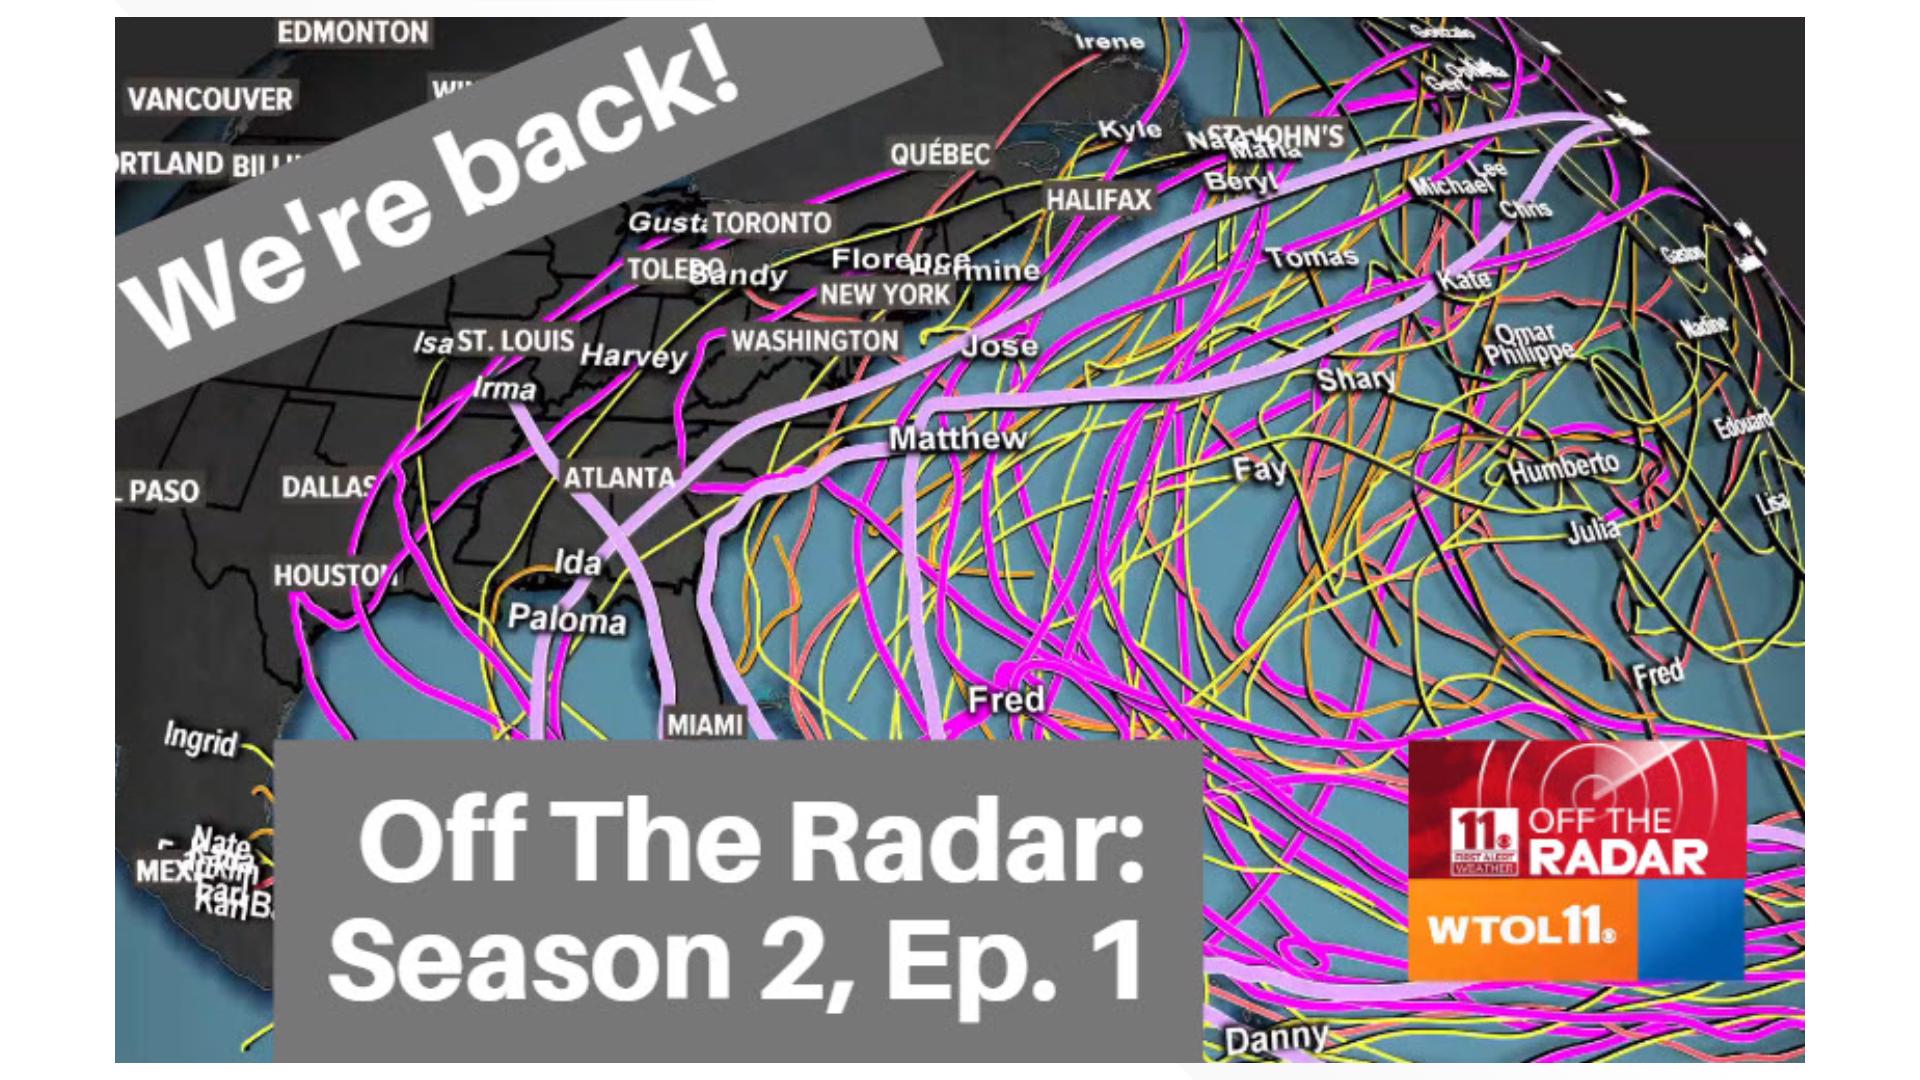 We are BACK! Welcome to Season 2 of the only local weather podcast in the area!